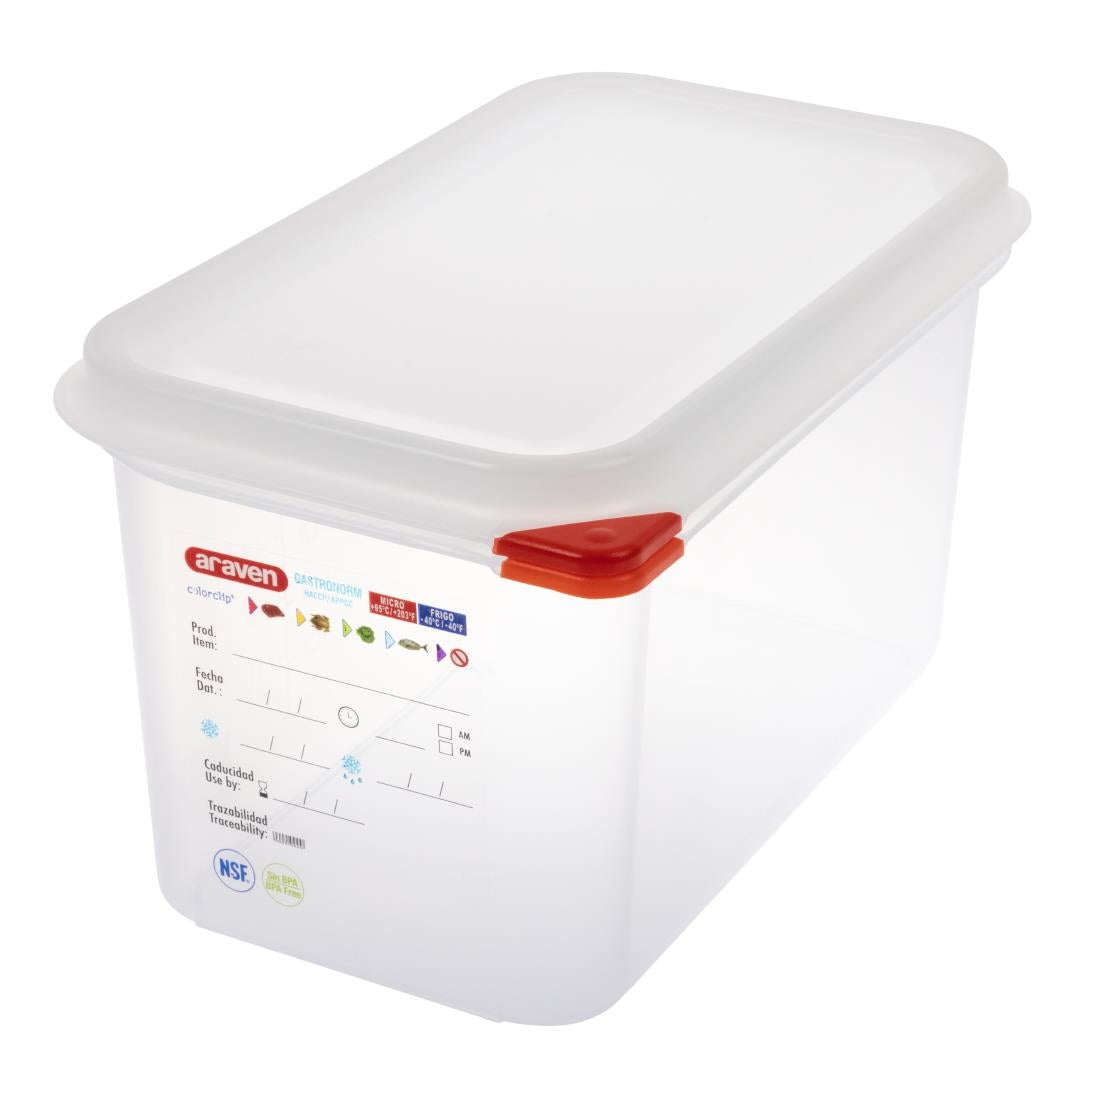 Araven Polypropylene 1/4 Gastronorm Food Containers 4.3Ltr (Pack of 4) JD Catering Equipment Solutions Ltd